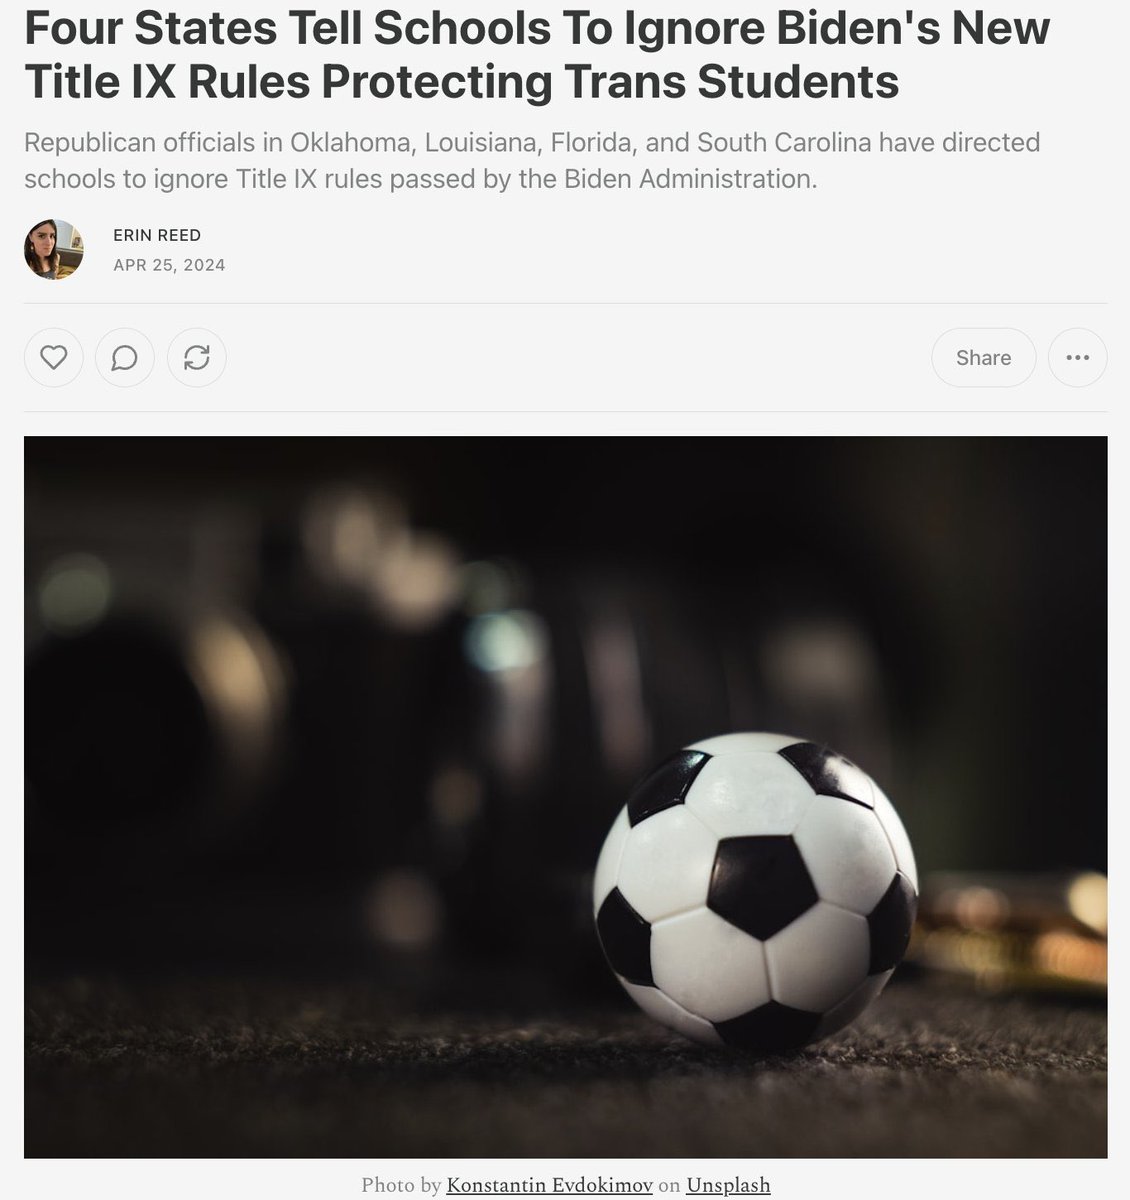 1. Biden has released new Title IX rules protecting transgender and LGBTQ+ students, rescinding Trump-era policies that legalized discrimination.

Now, officials four states have told their schools to 'ignore' them and continue discriminating

Subscribe to support my journalism.